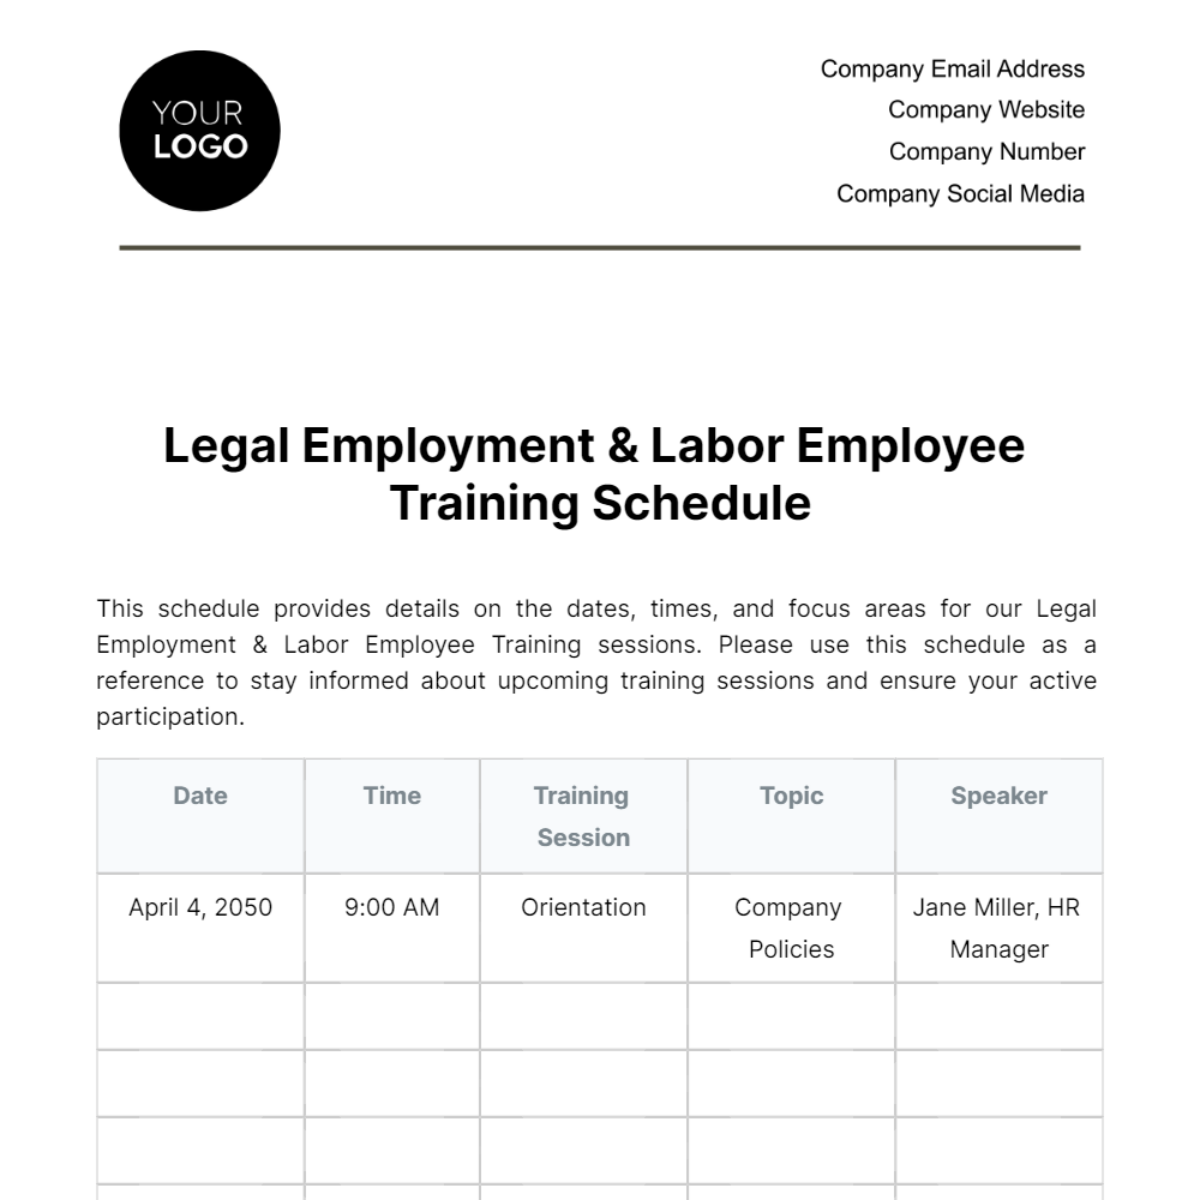 Free Legal Employment & Labor Employee Training Schedule Template